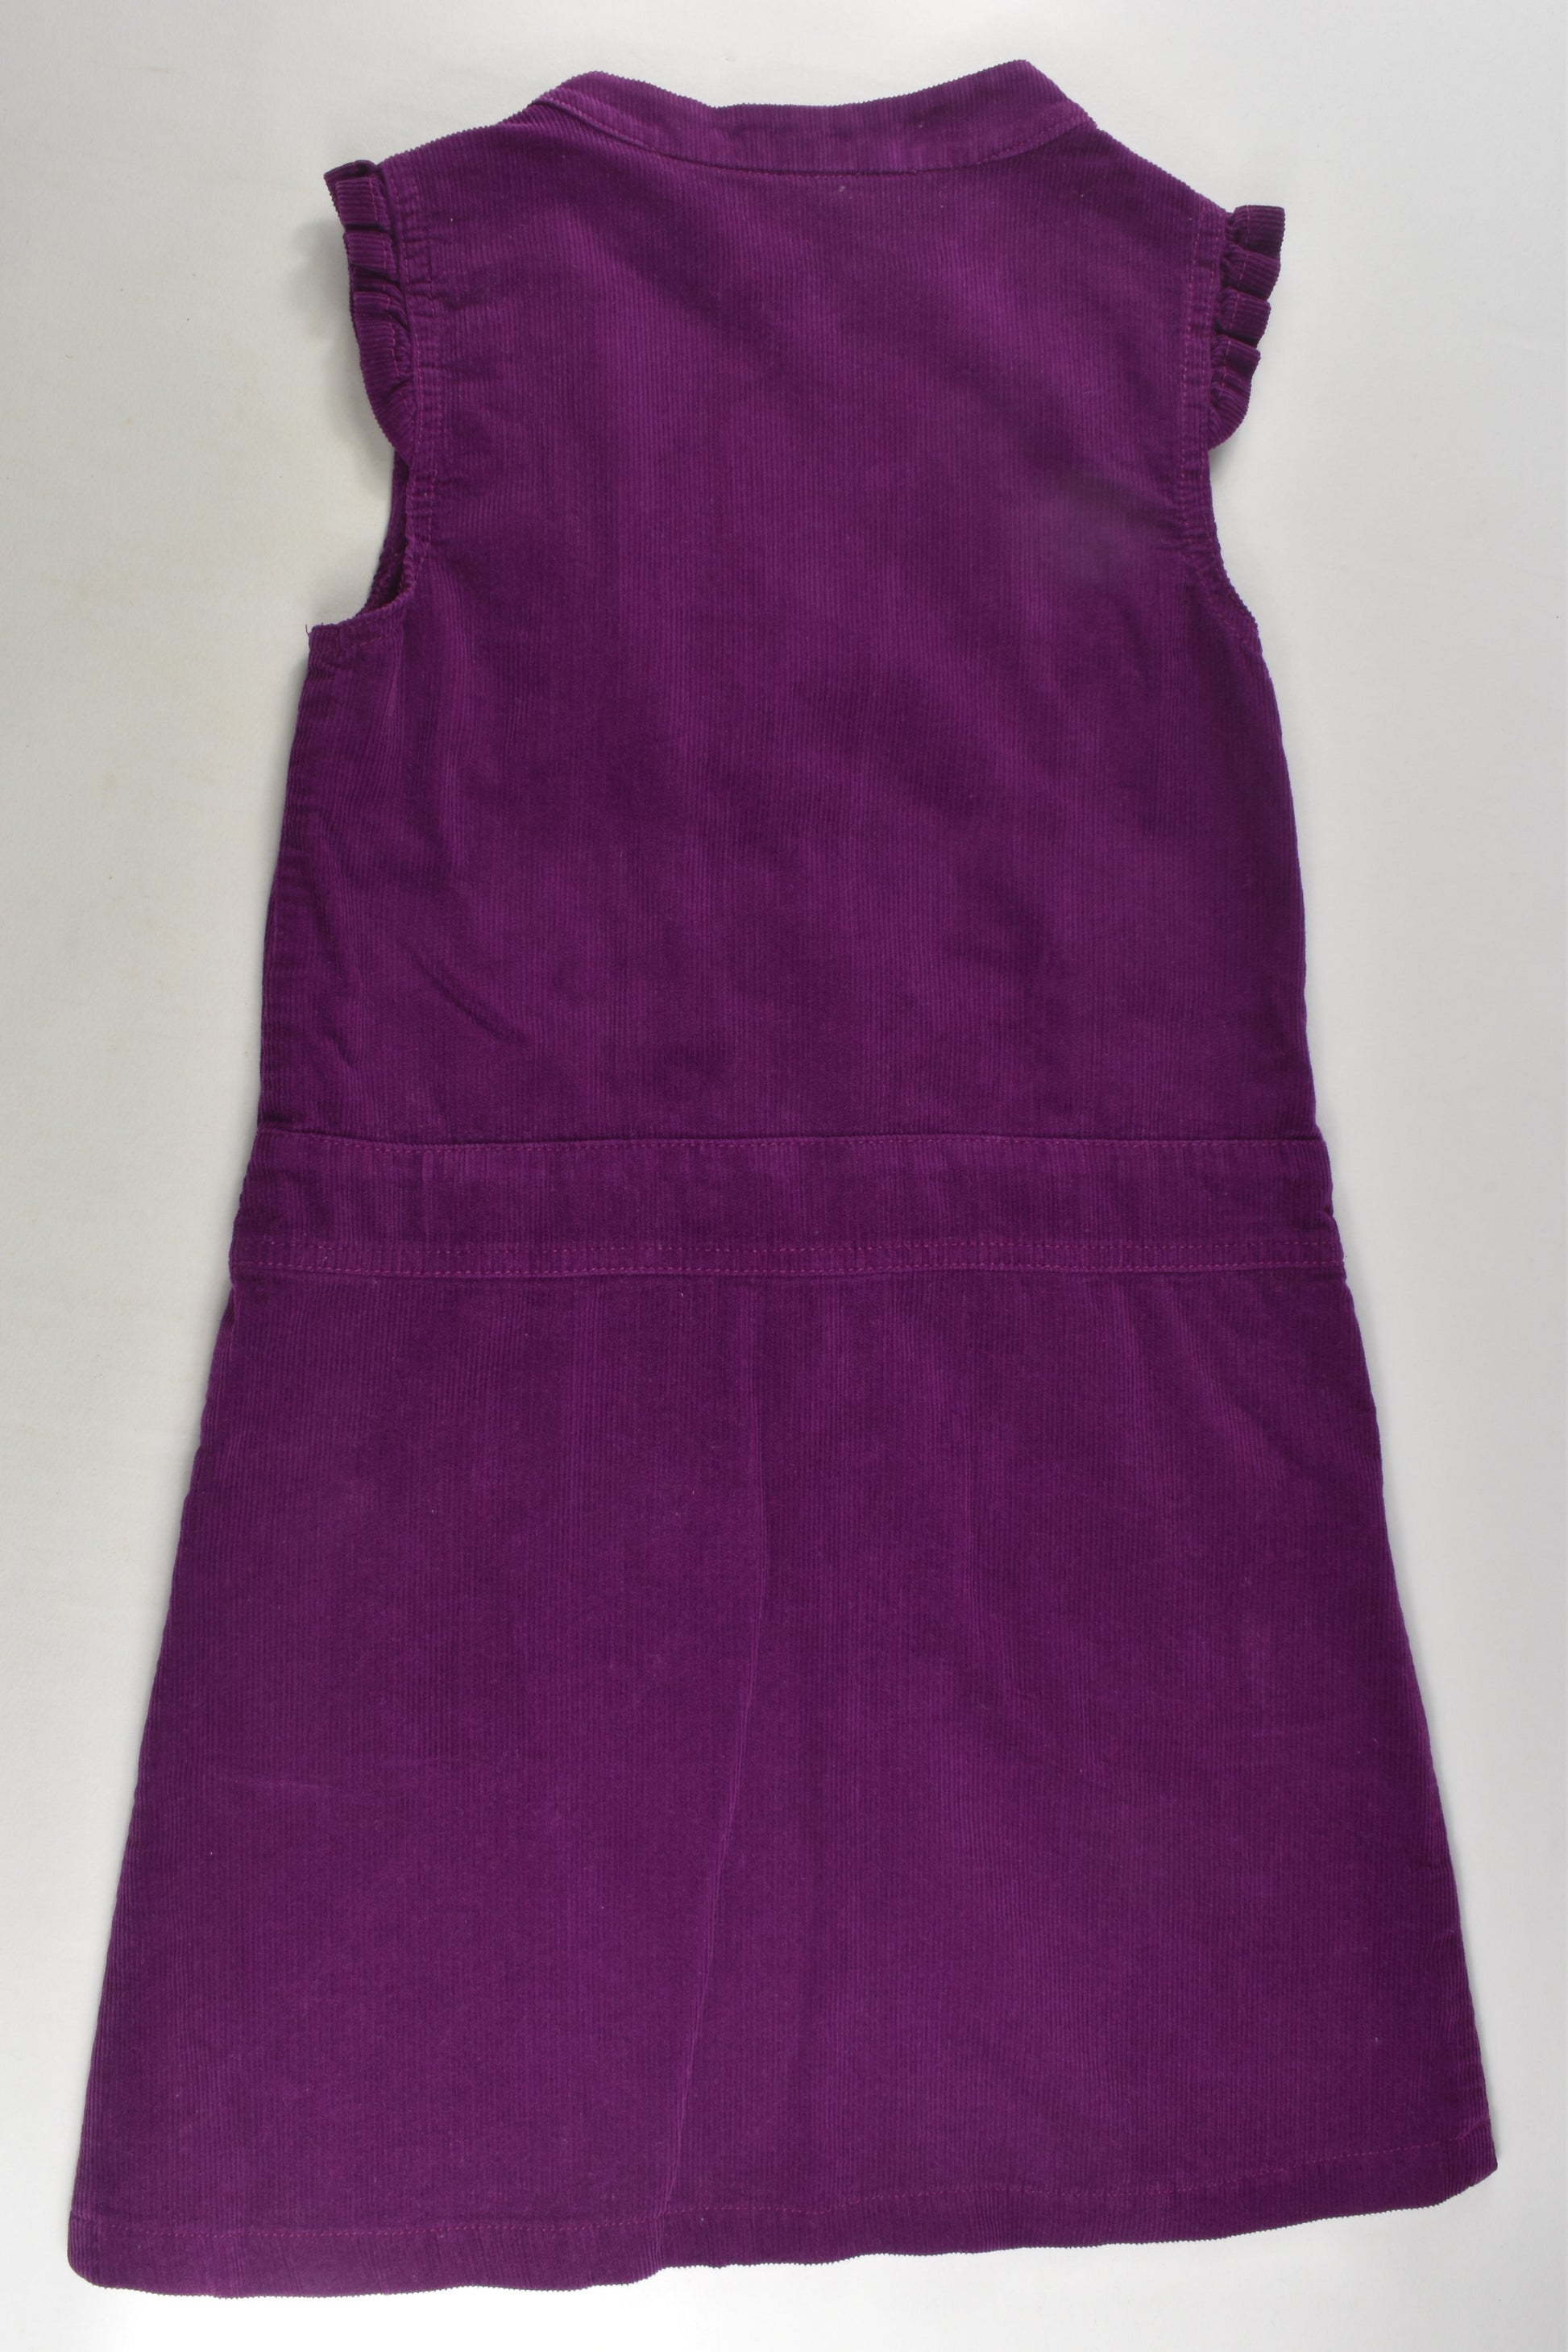 Woolworths Size 6-7 Cord Dress